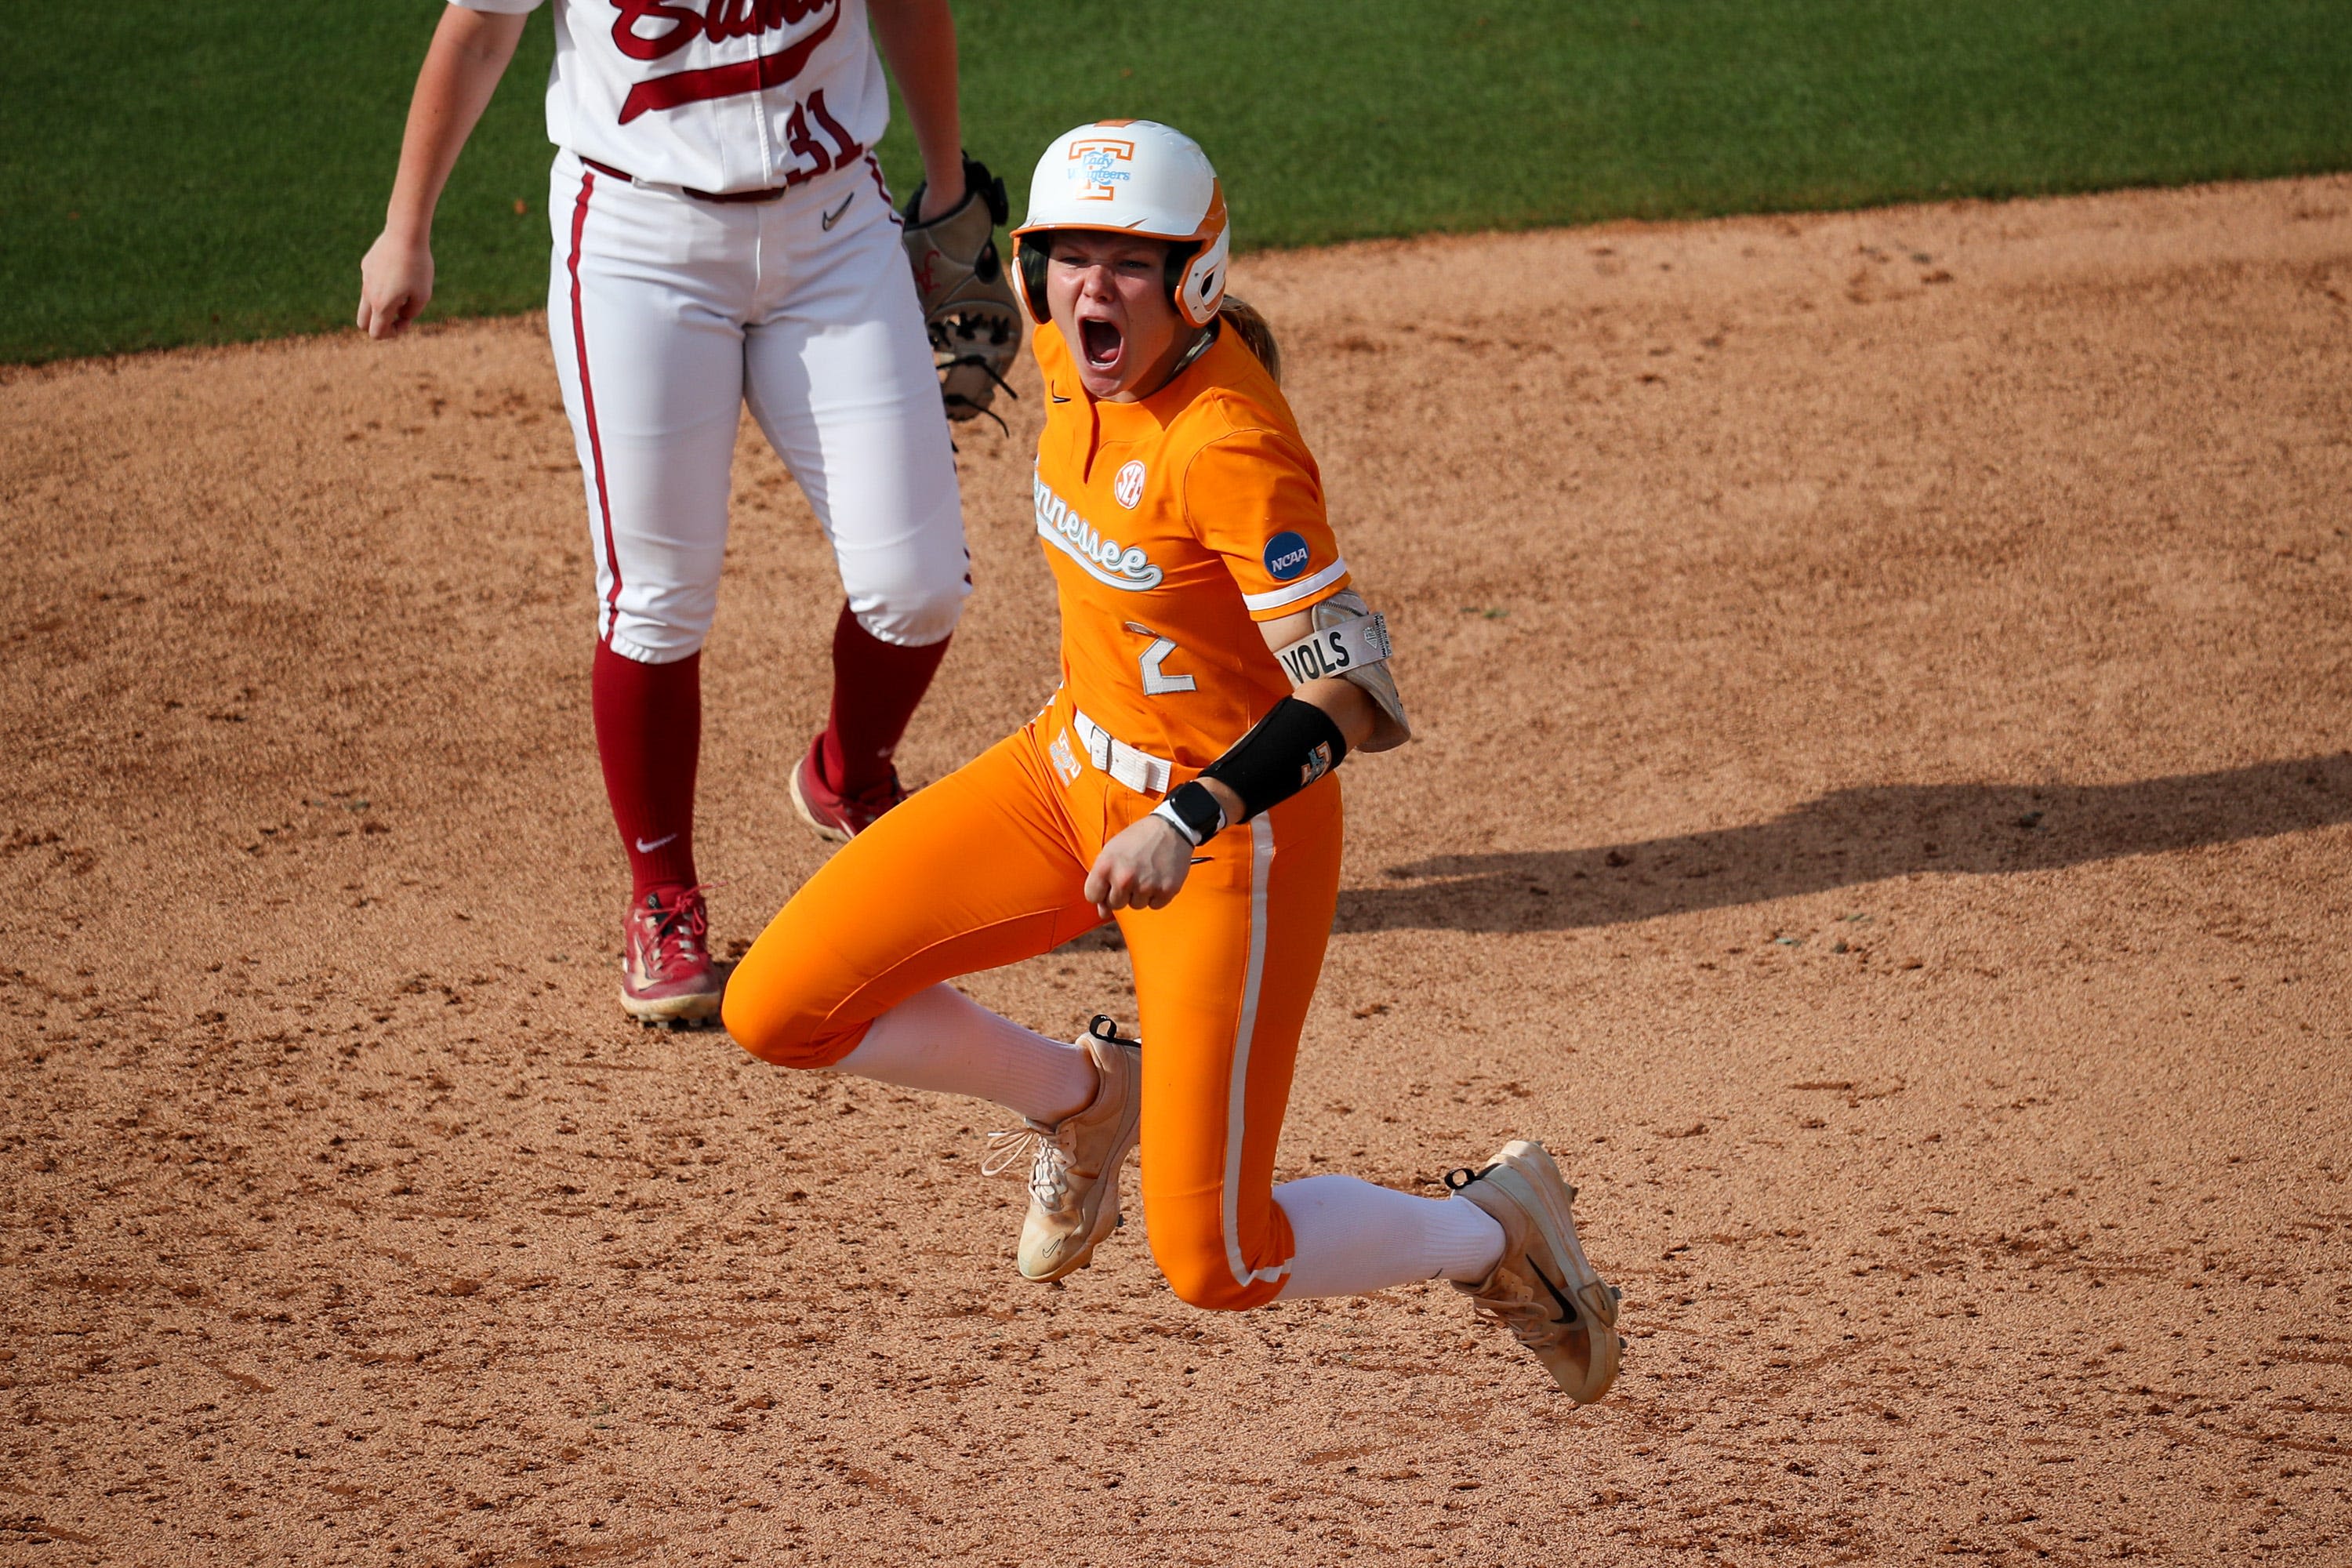 Laura Mealer's home run puts Tennessee softball one win from WCWS after beating Alabama